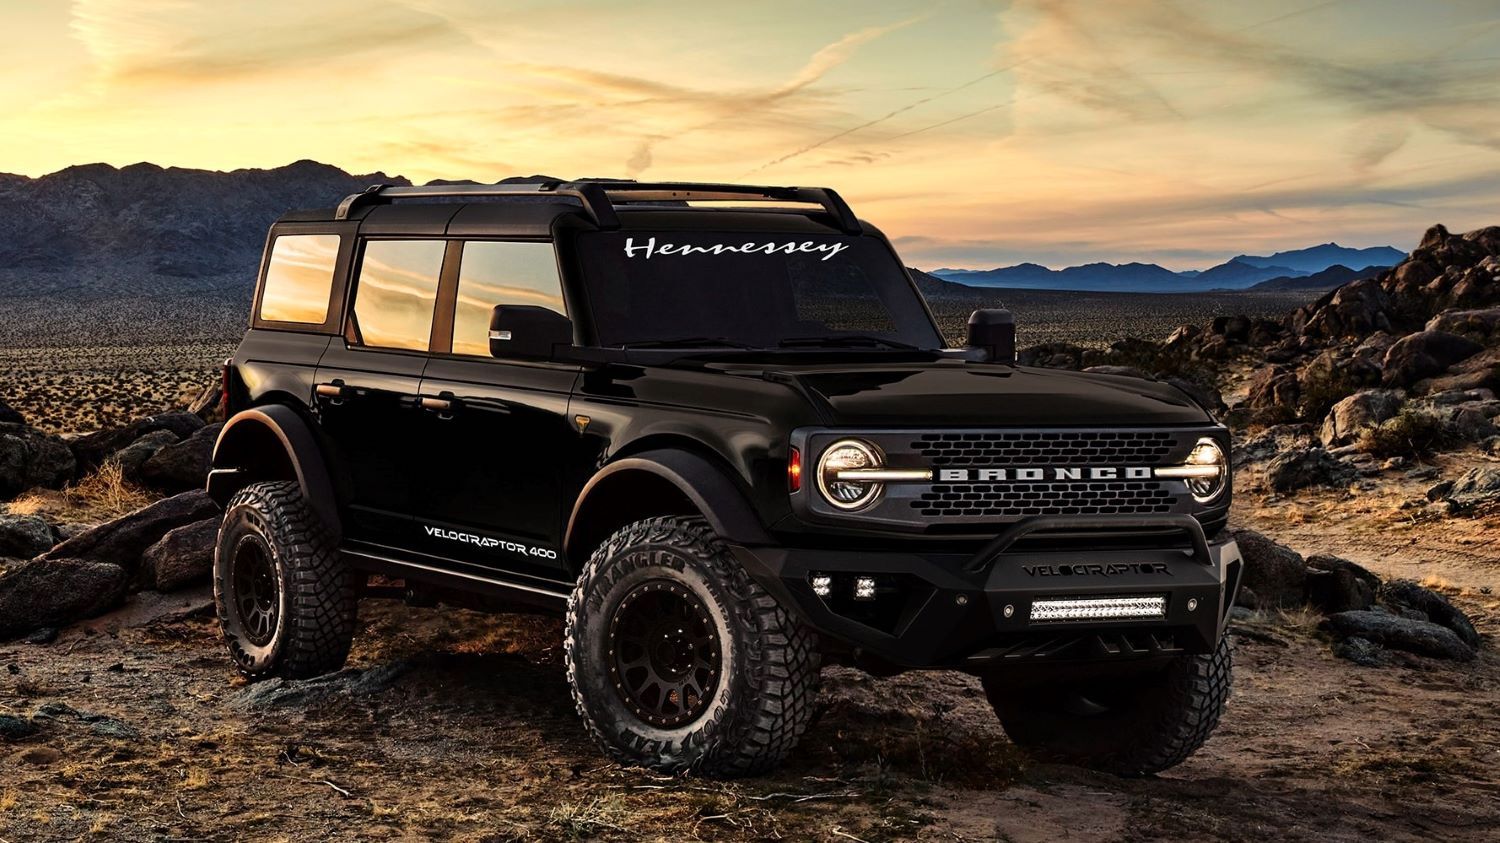 the Hennessy VelociRaptor 400 Bronco is a 2021 Ford Bronco that got jacked up on whatever it is they do down there in Texas.